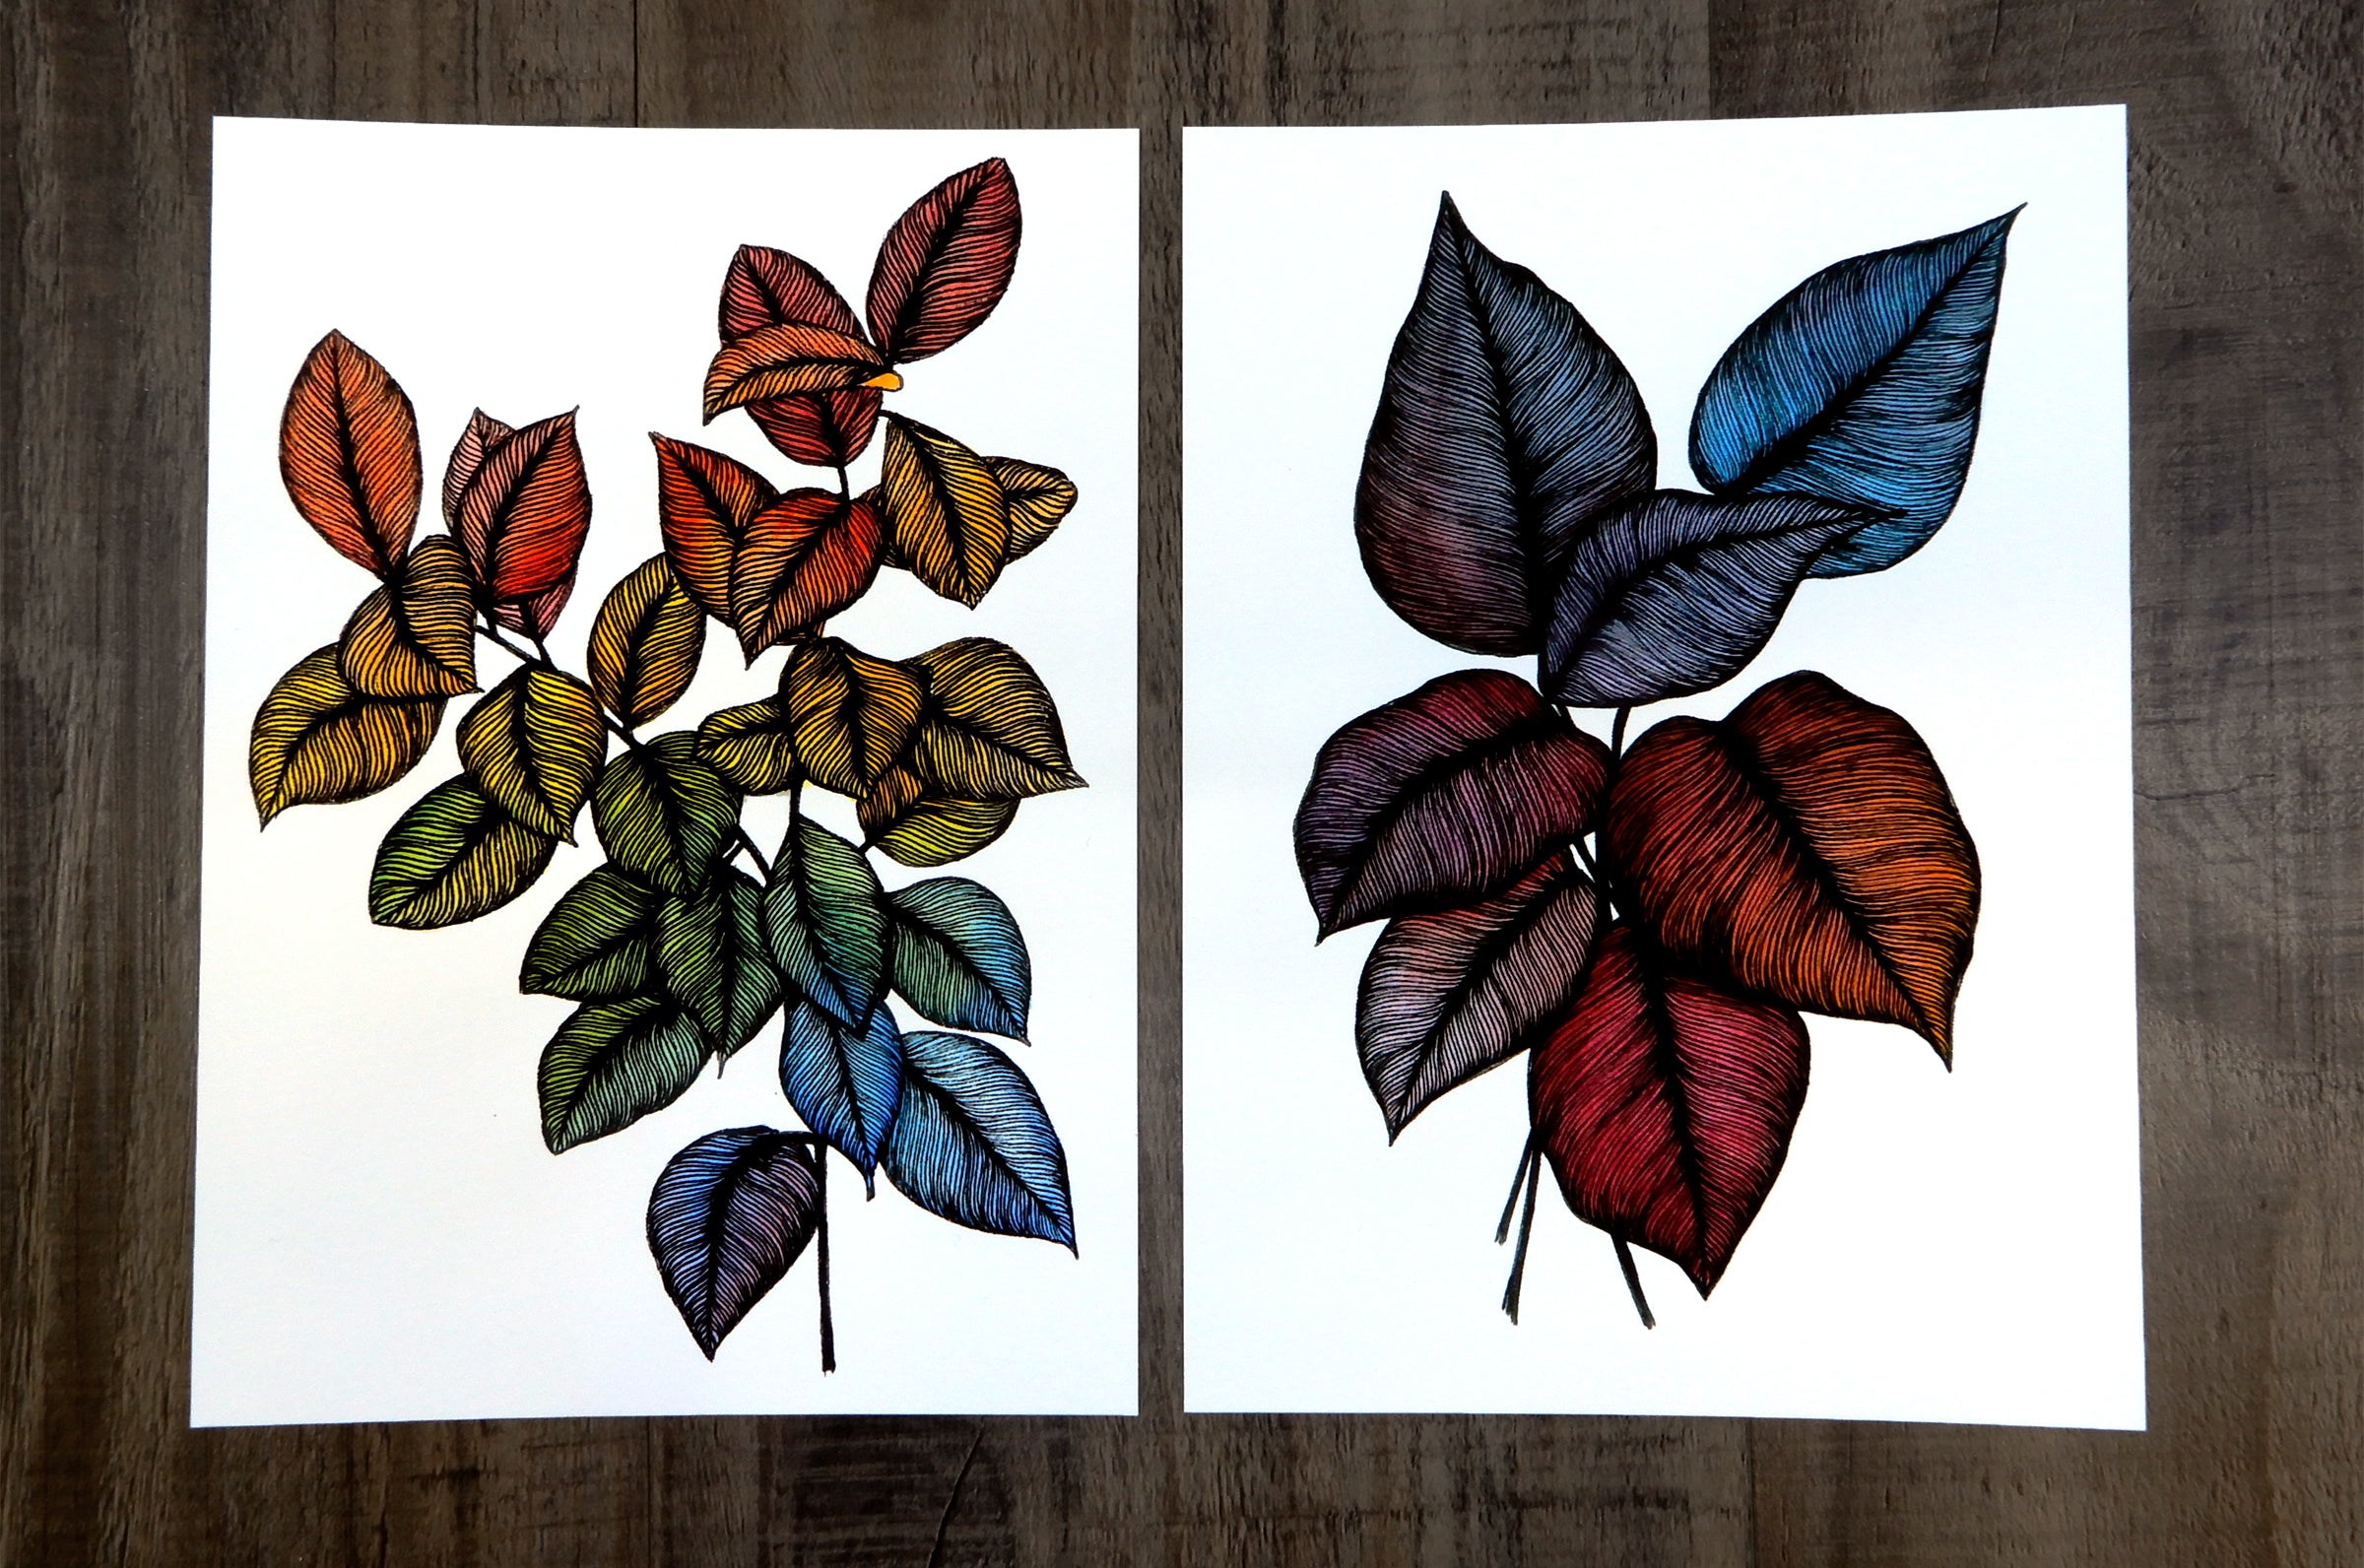 Illustrated leaves Fine art print on archival paper printed with archival ink from Clubcard Printing USA